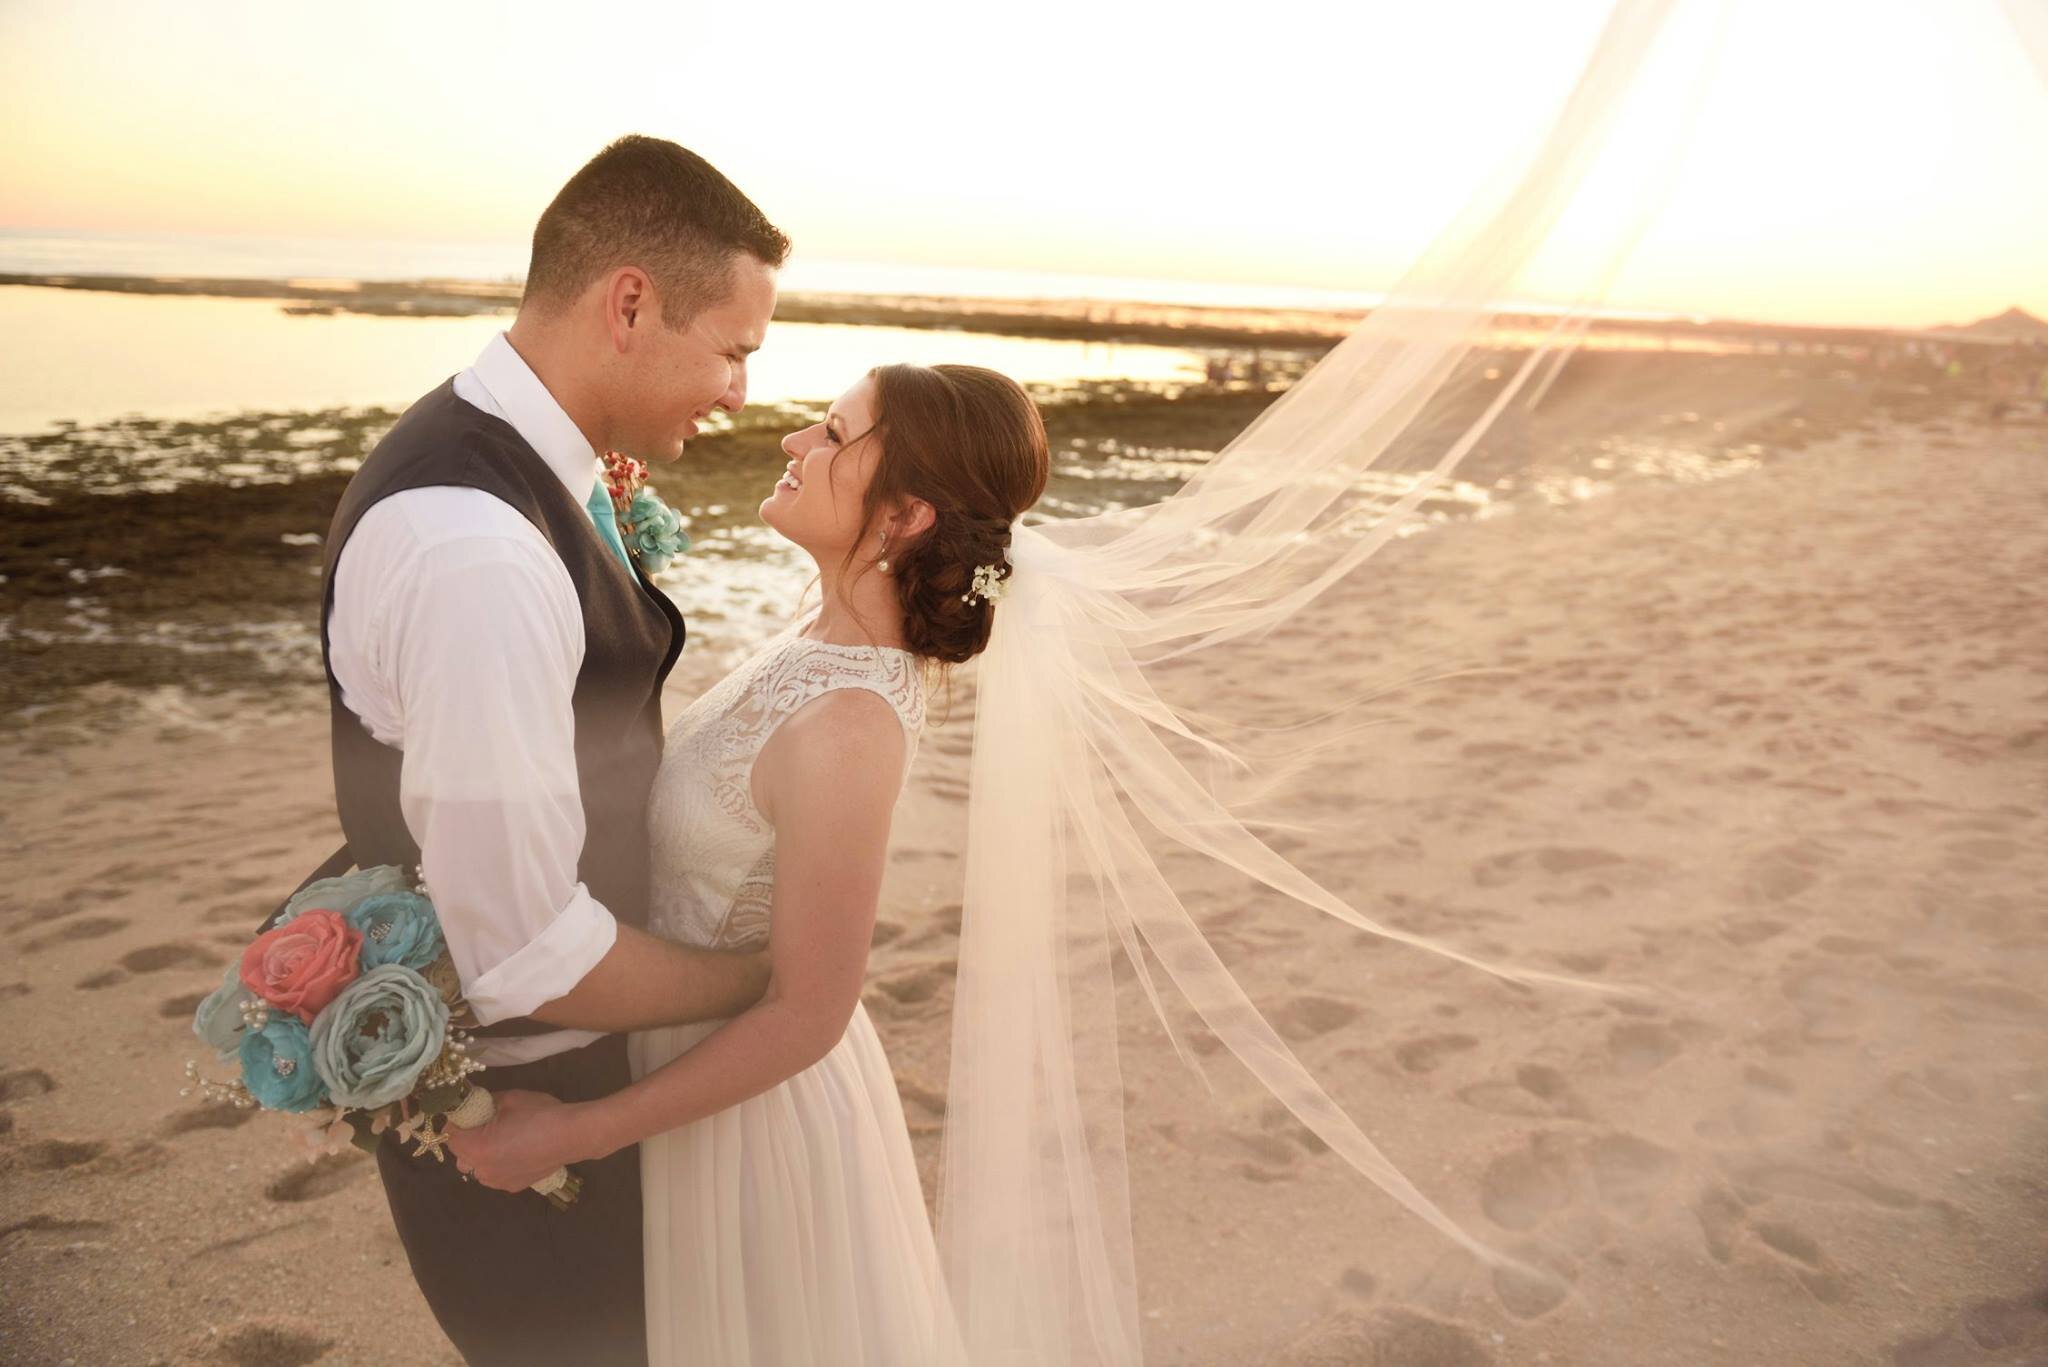 Bride and groom holding each other in bespoke lace wedding dress at beach resort wedding and long wedding veil.jpg